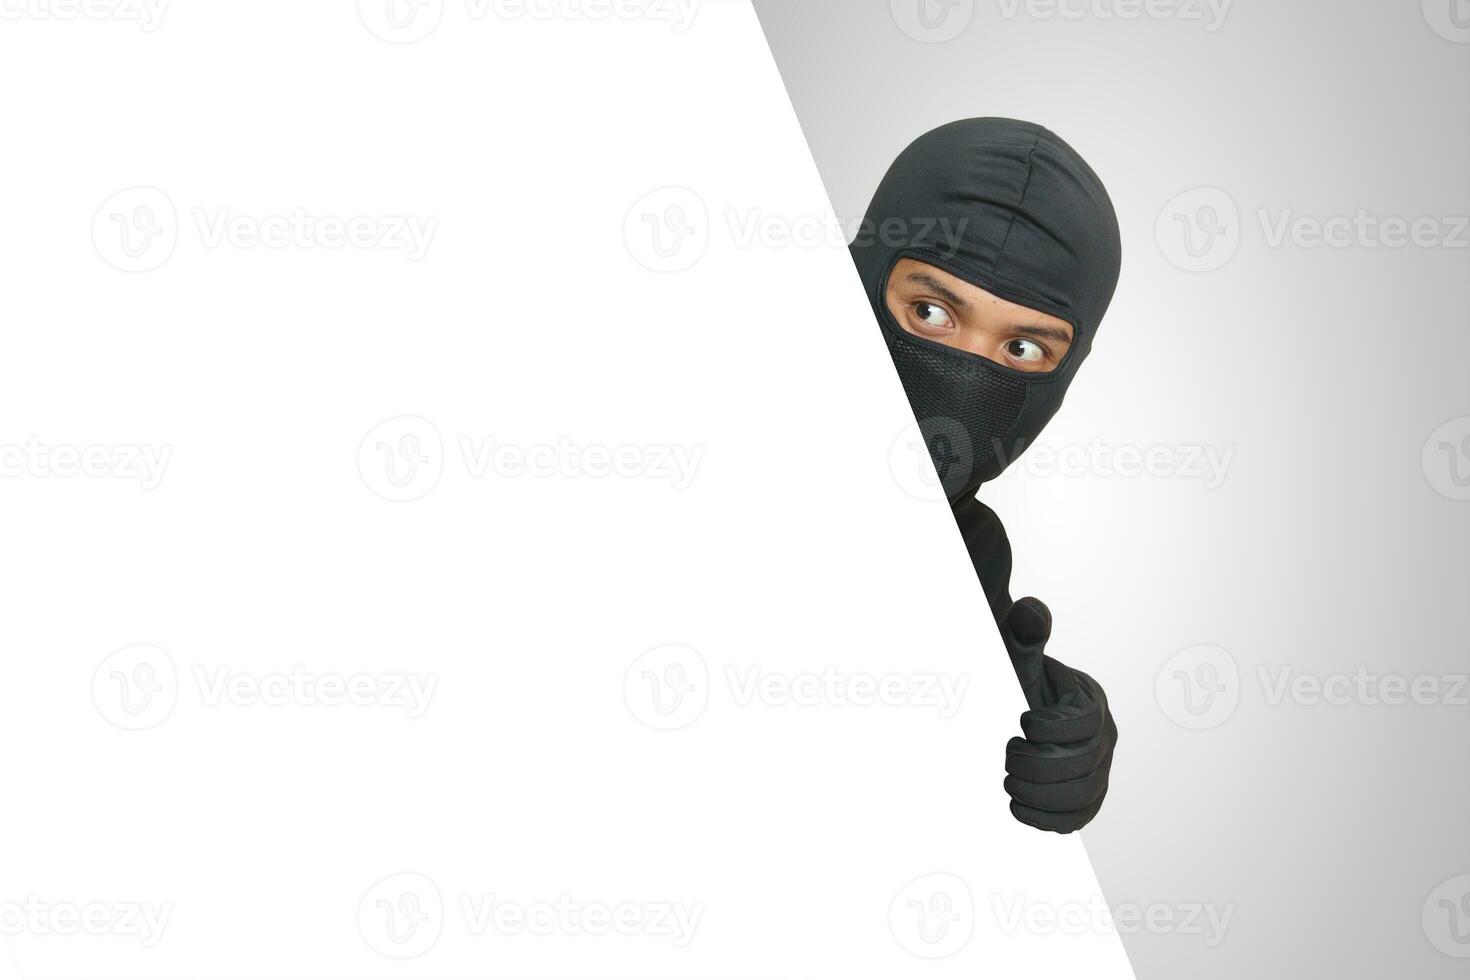 Mysterious thief wearing black hoodie hiding behind wall, sneaking, and looking for stolen goods. Crime concept. Isolated image on gray background photo